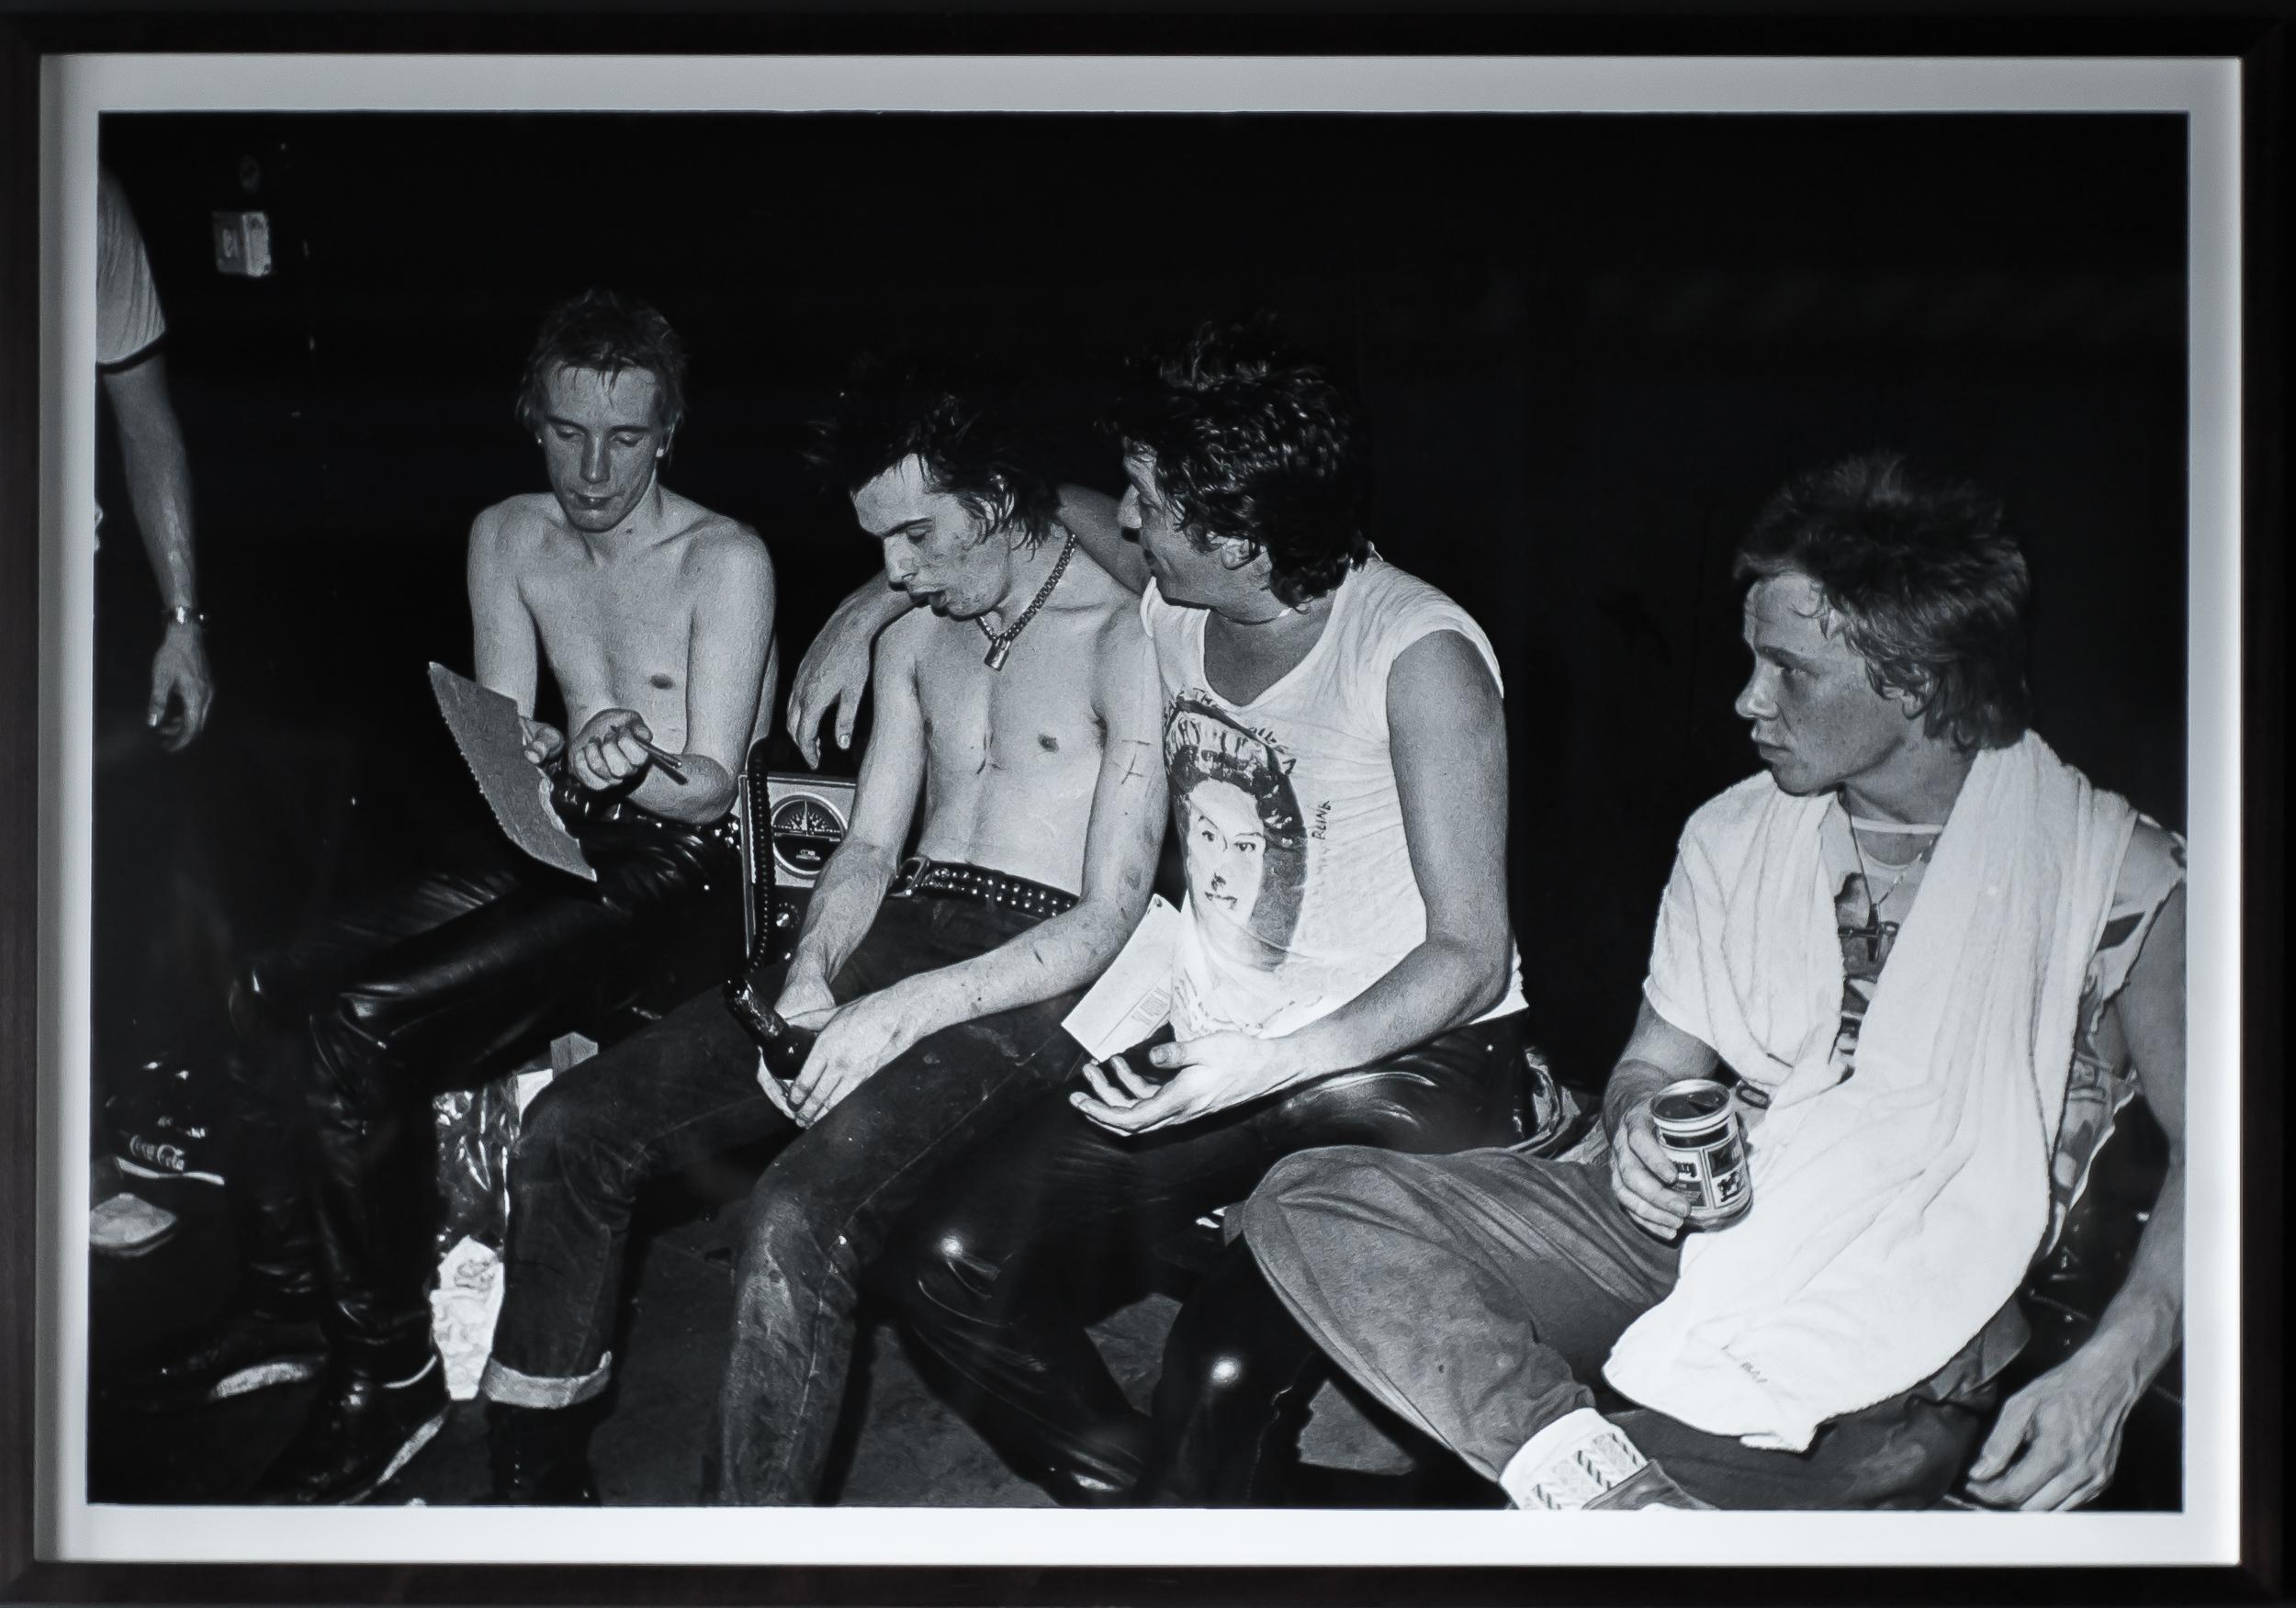 British Iconic Large Photo by Dennis Morris of Sex Pistols Backstage